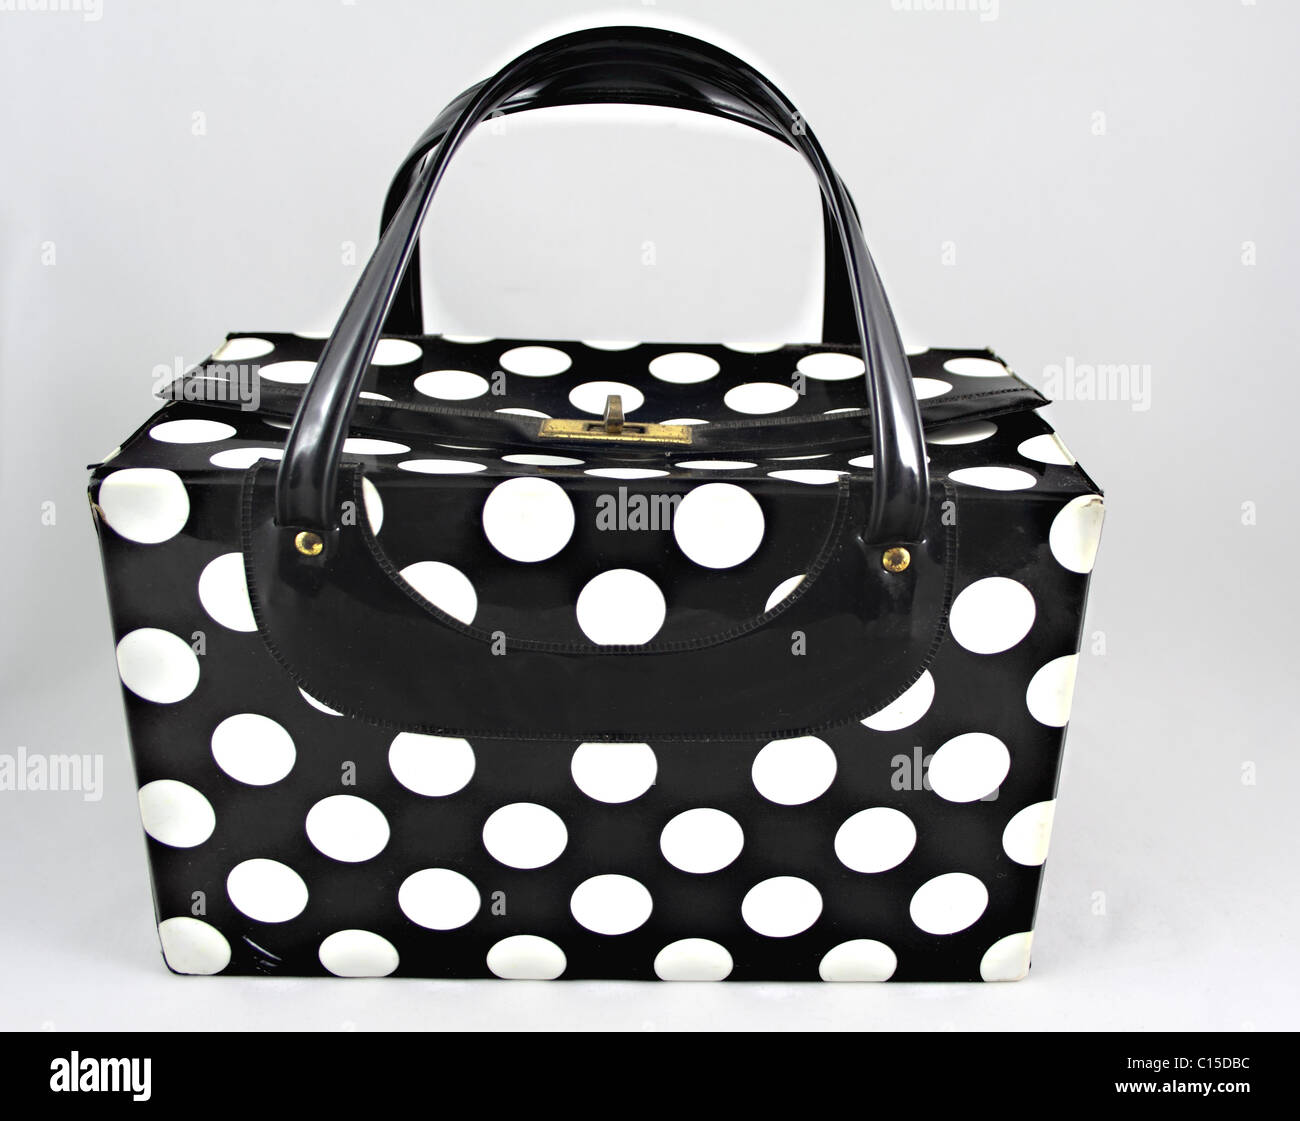 Polka dot, vanity case with plastic black handles and gold colored lock. Stock Photo